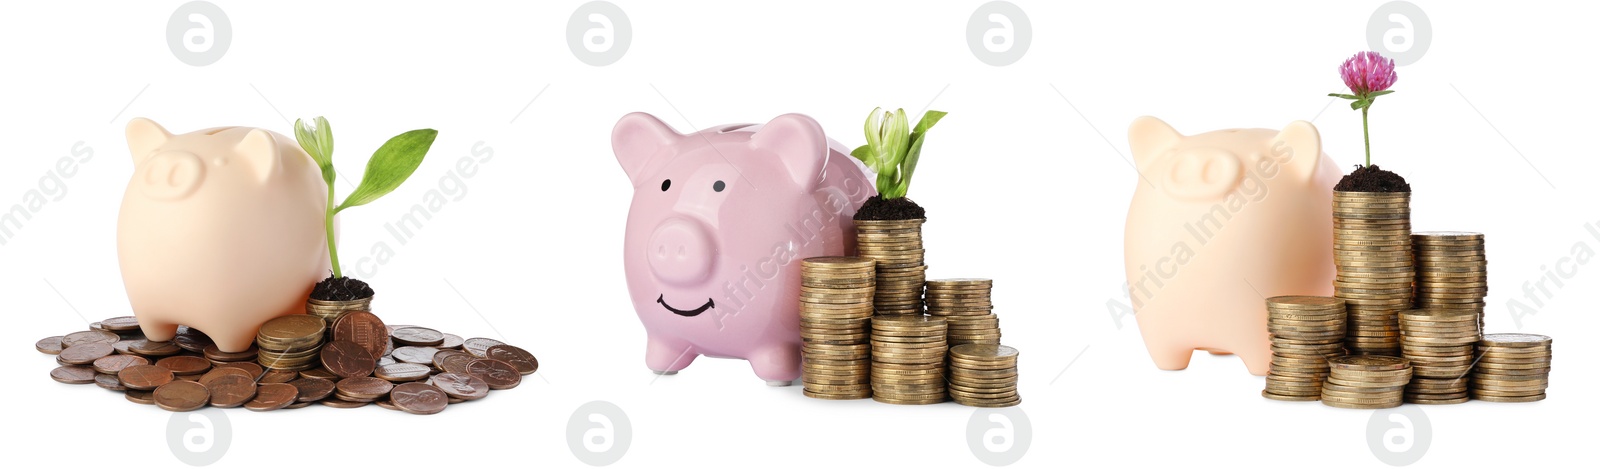 Image of Set with stacks of coins, growing plants and piggy banks on white background, banner design. Successful investment